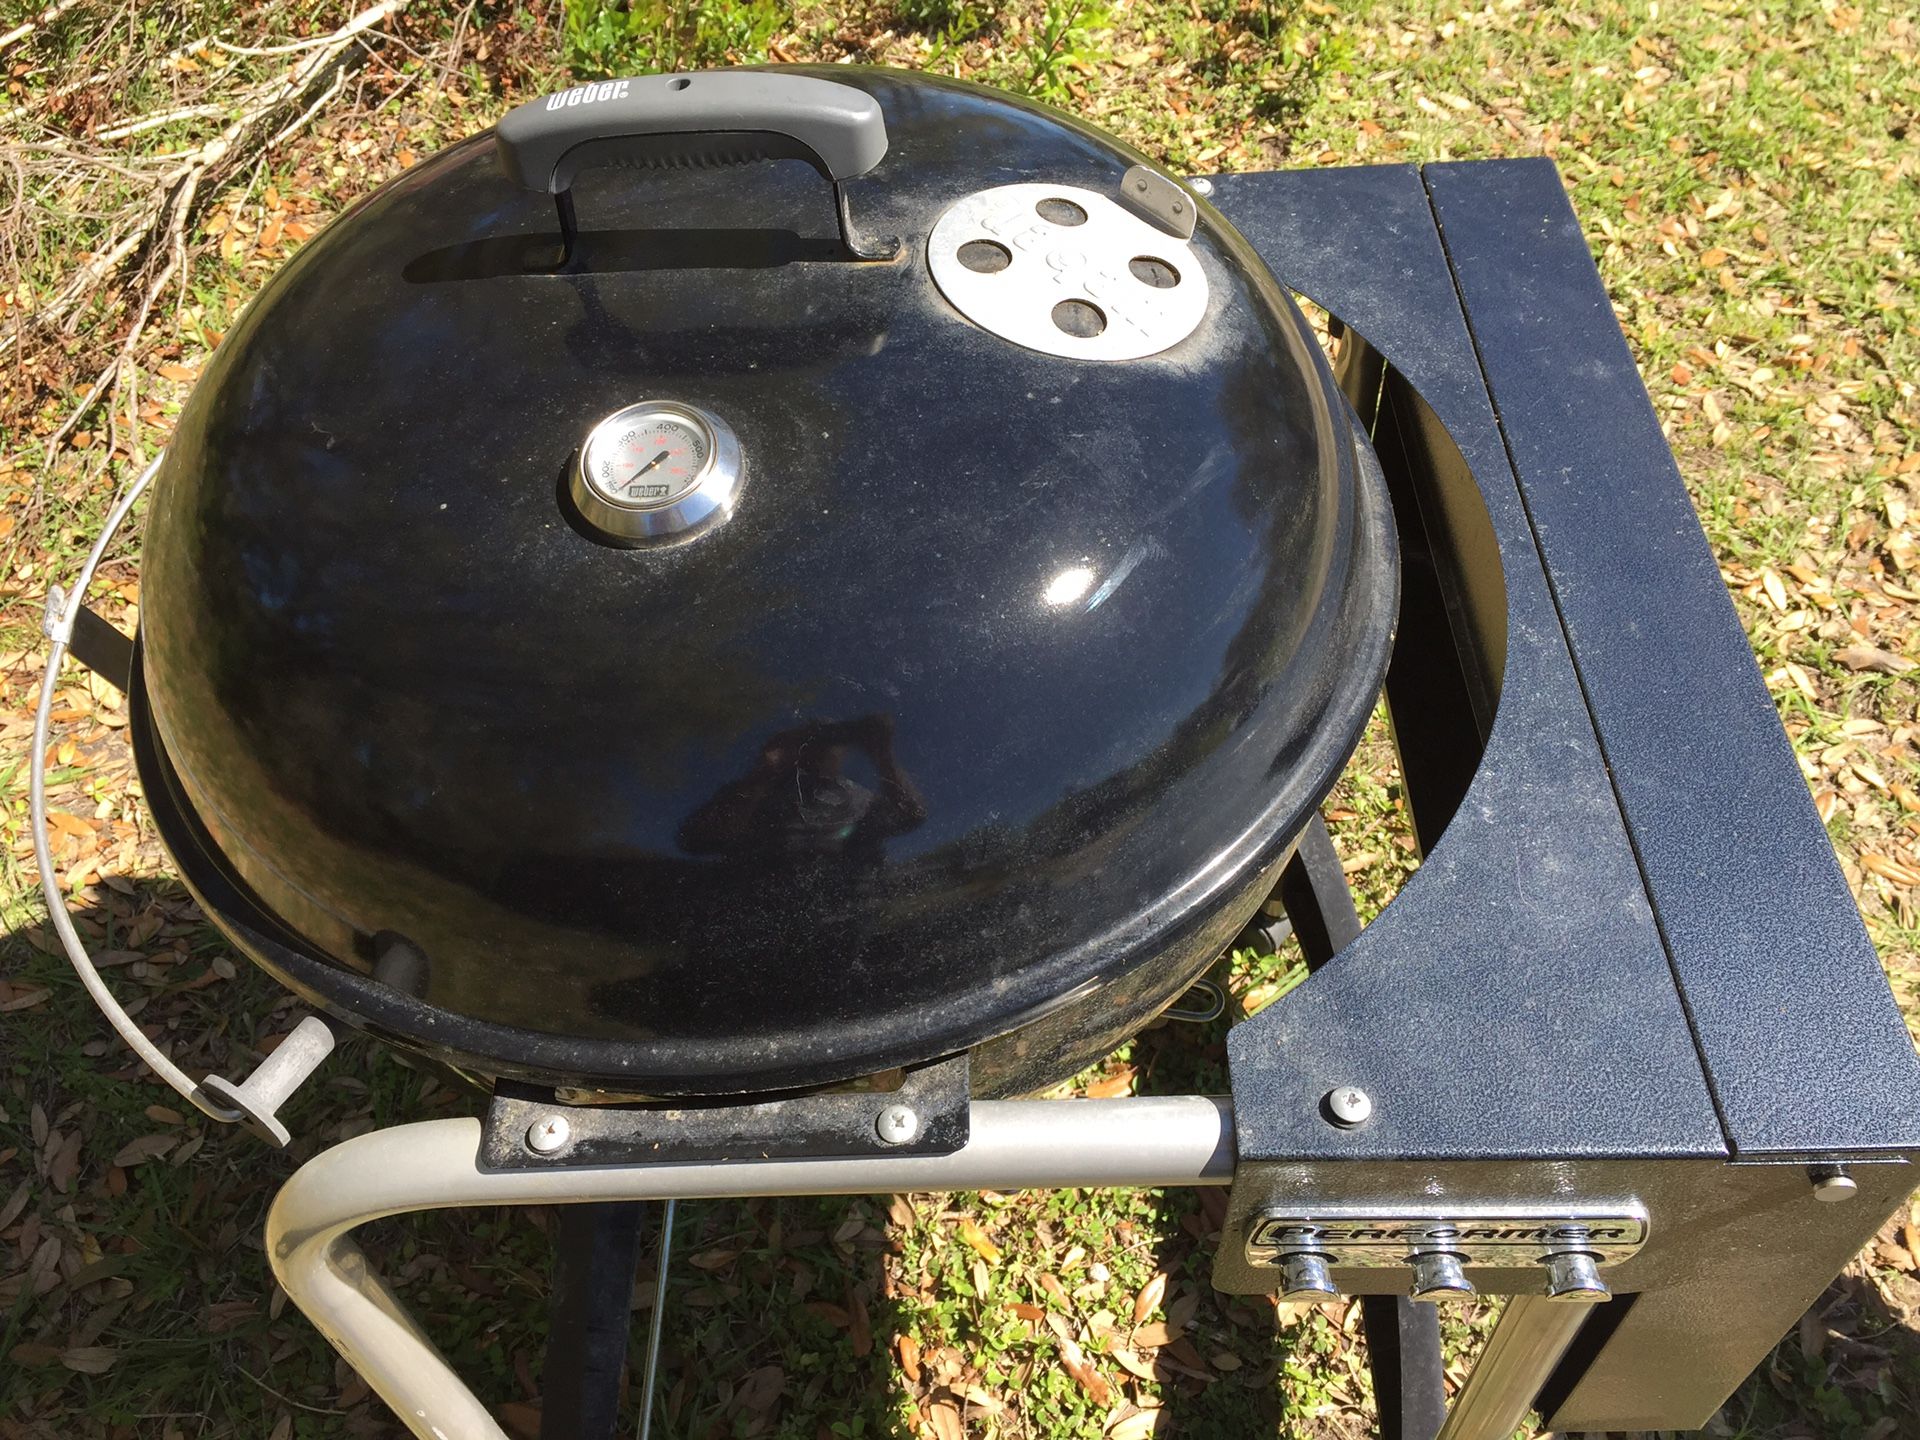 Webber grill / smoker. Great condition.